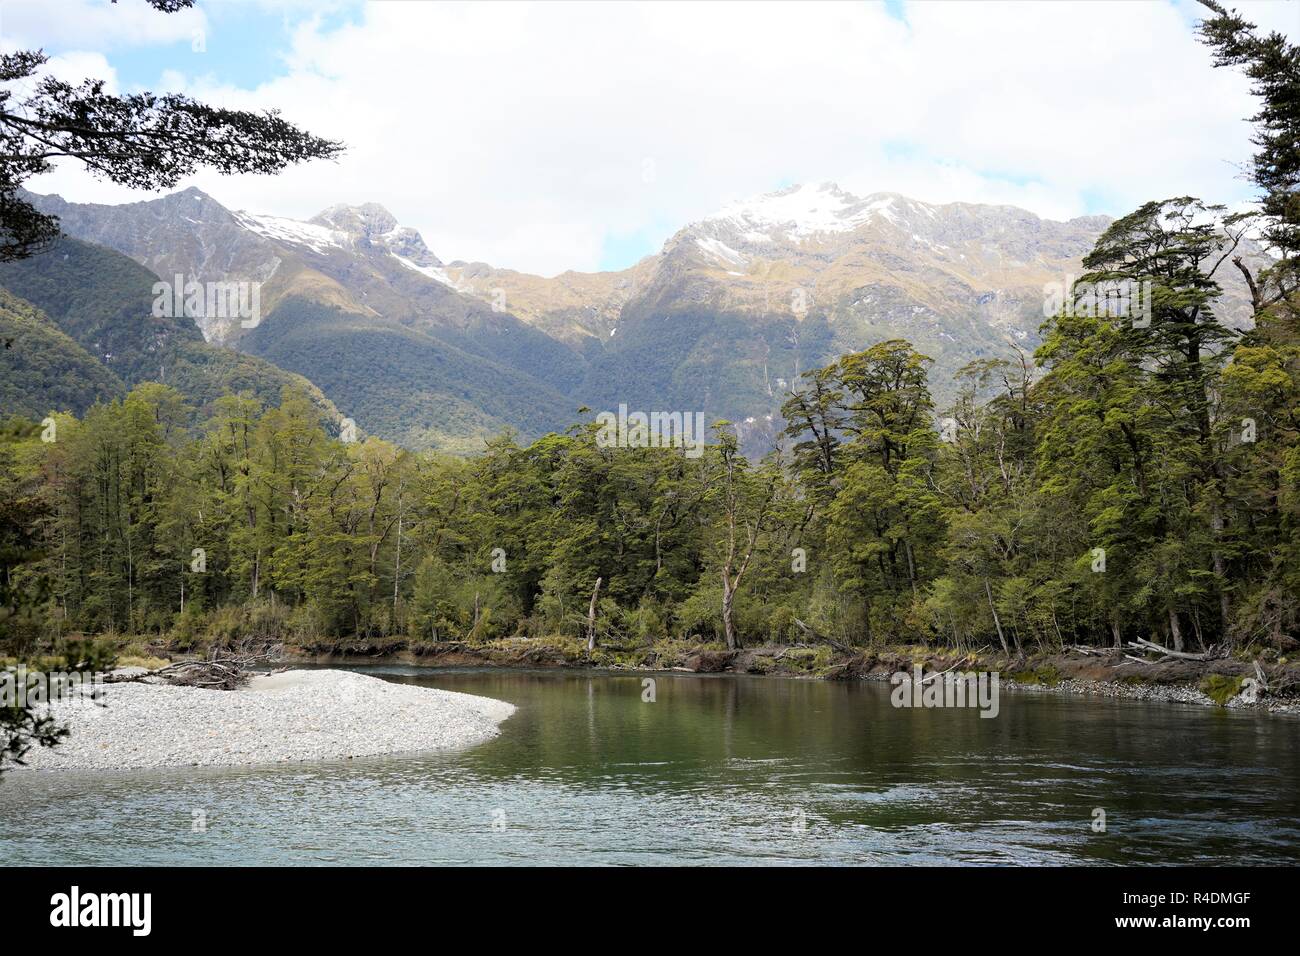 Lake surrounded by trees, mountains in the background. Milford Track, New Zealand South Island Stock Photo